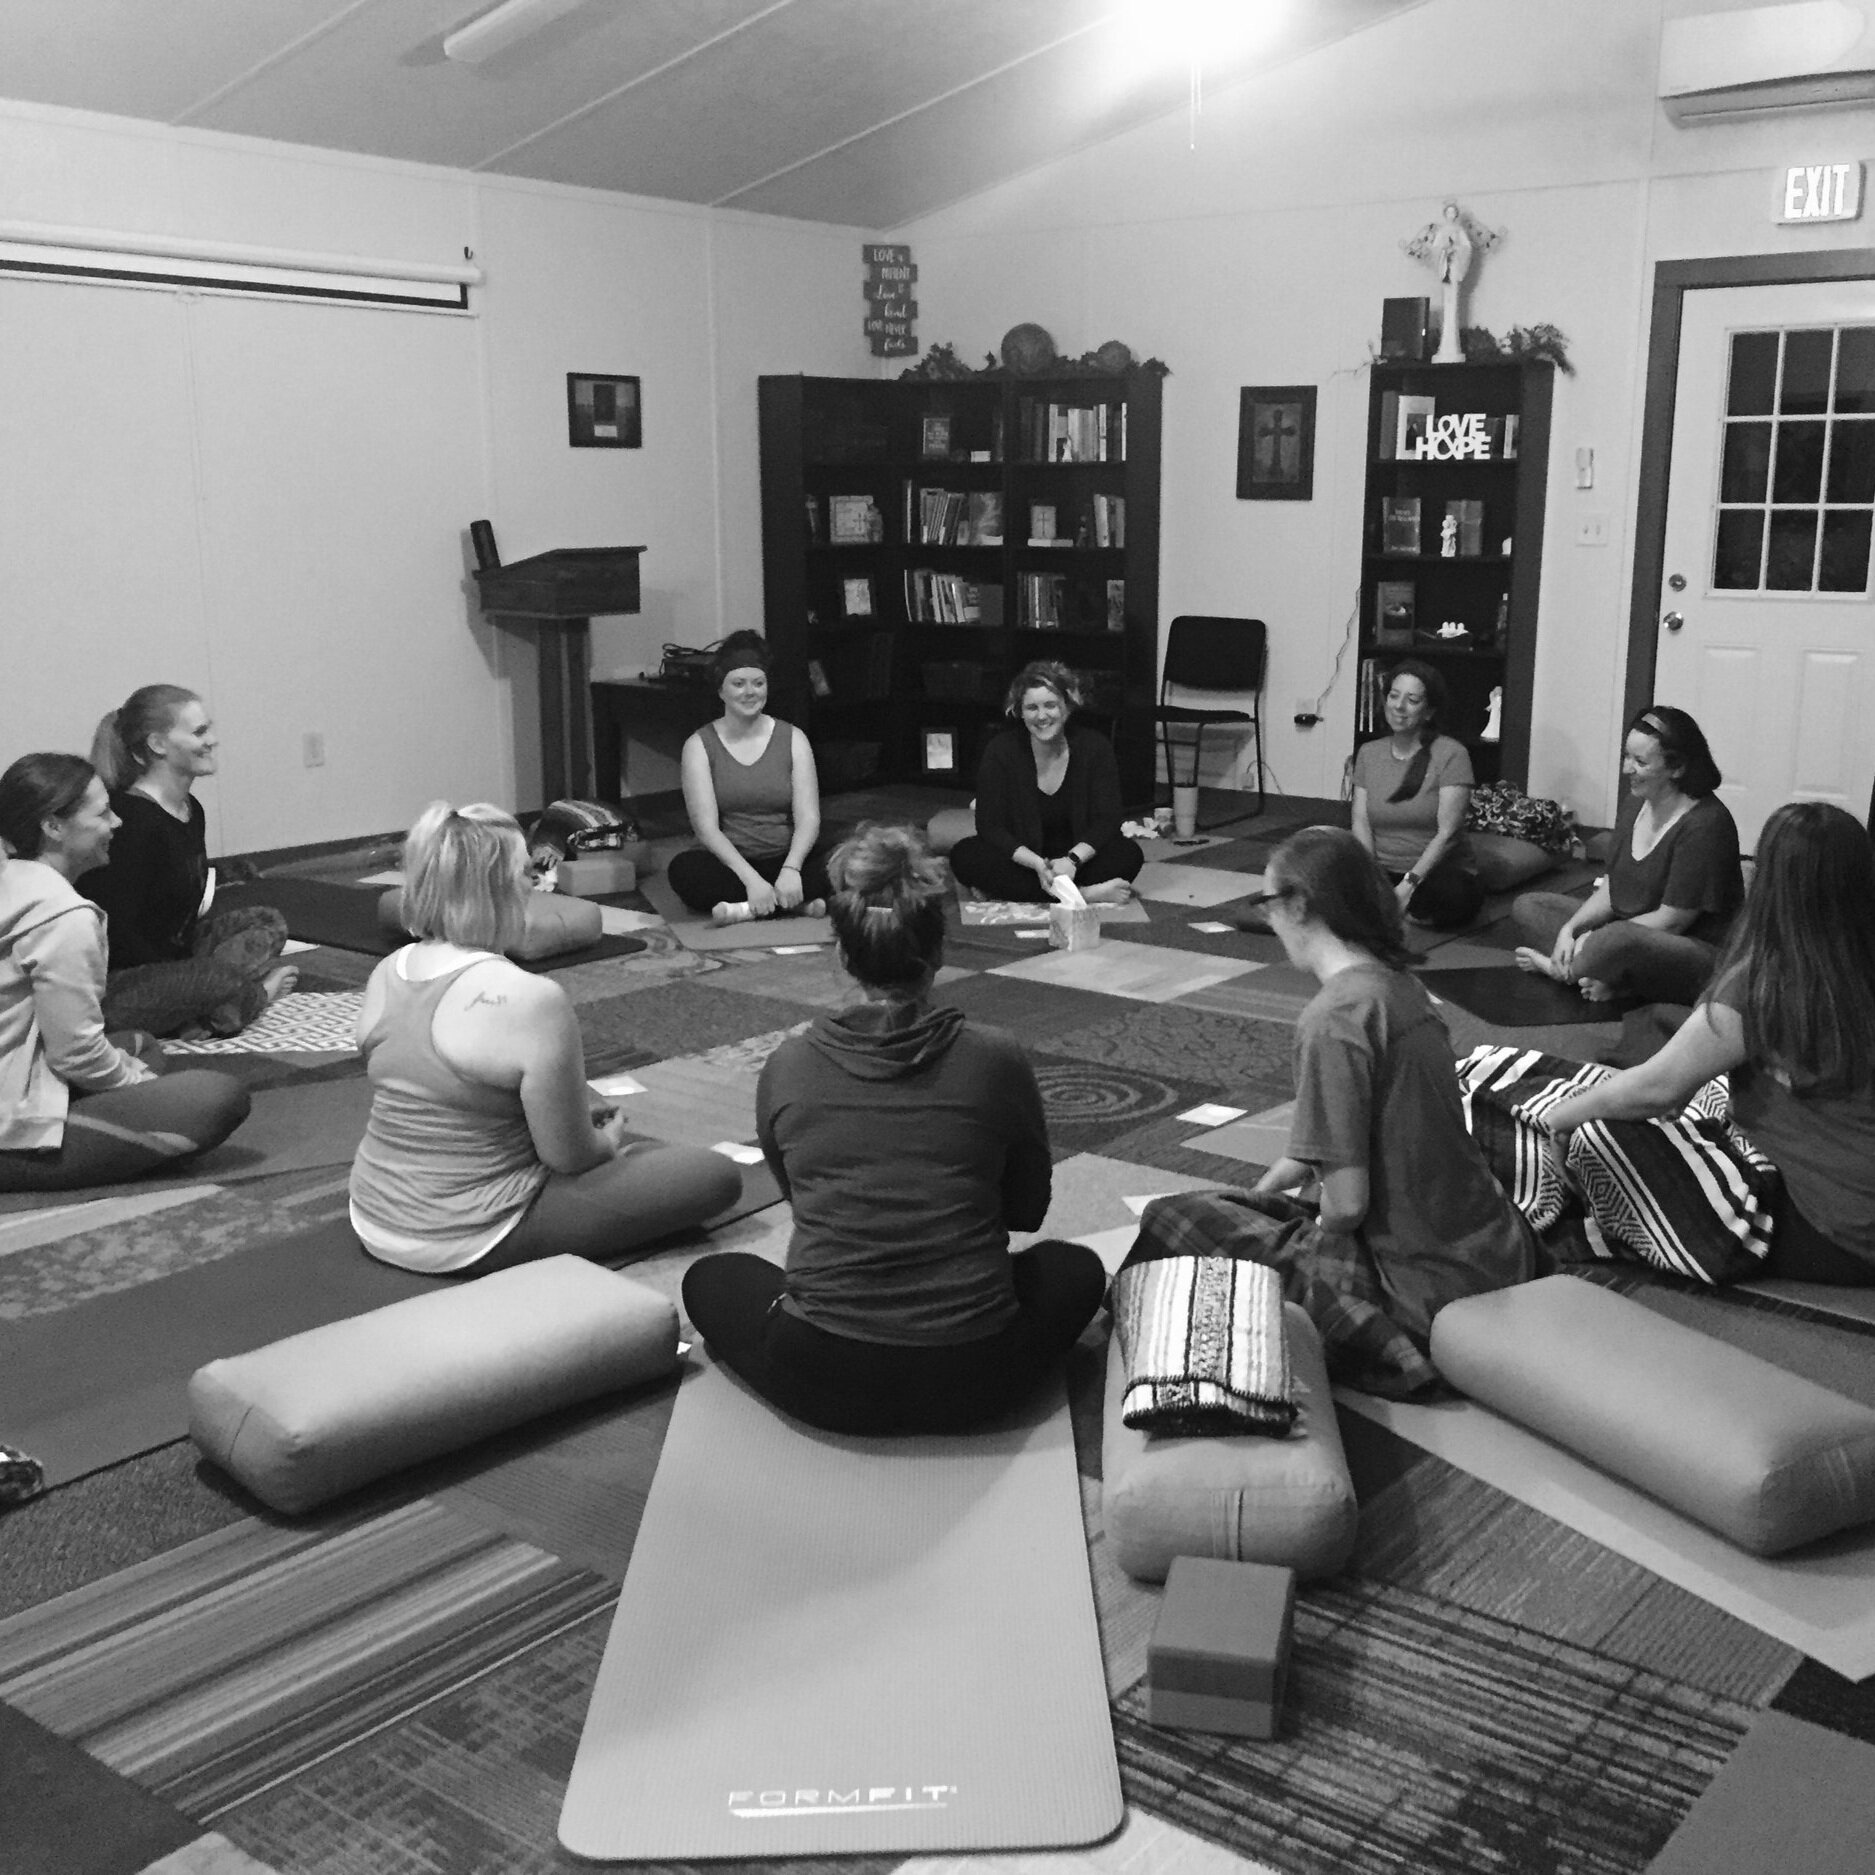 Community of Women during Yoga at Christian Self-Care Retreat